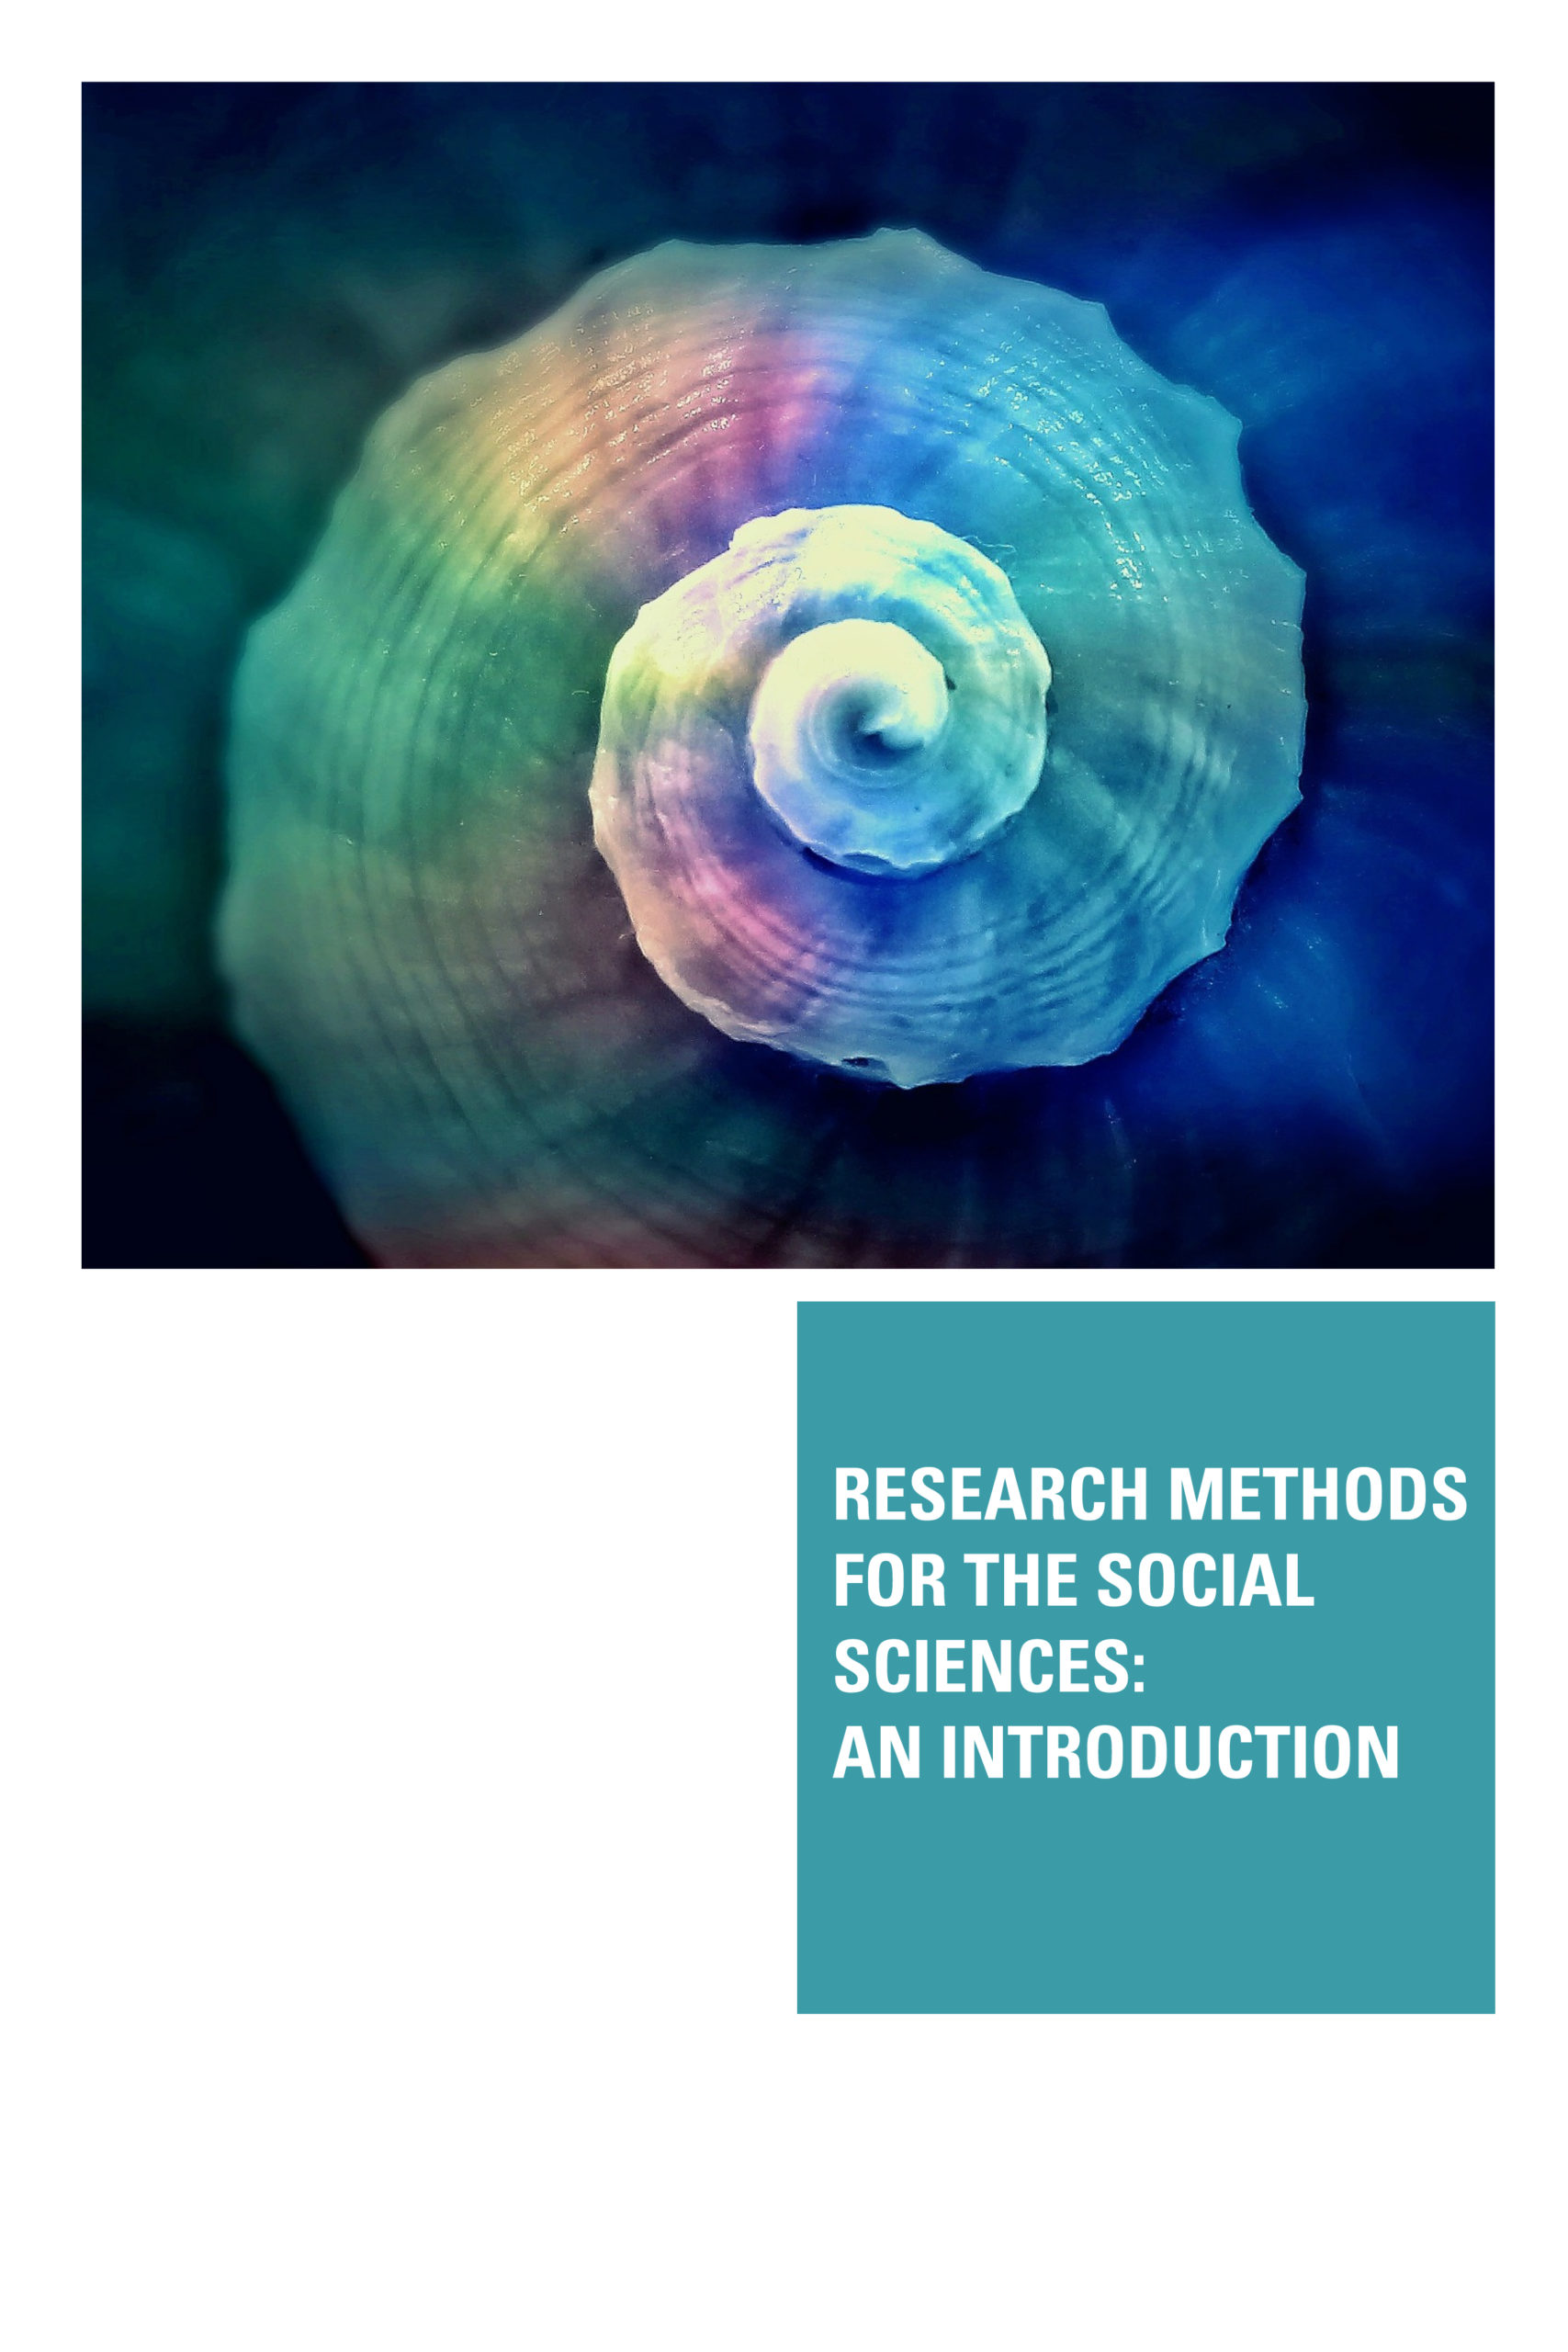 new research methods in social sciences